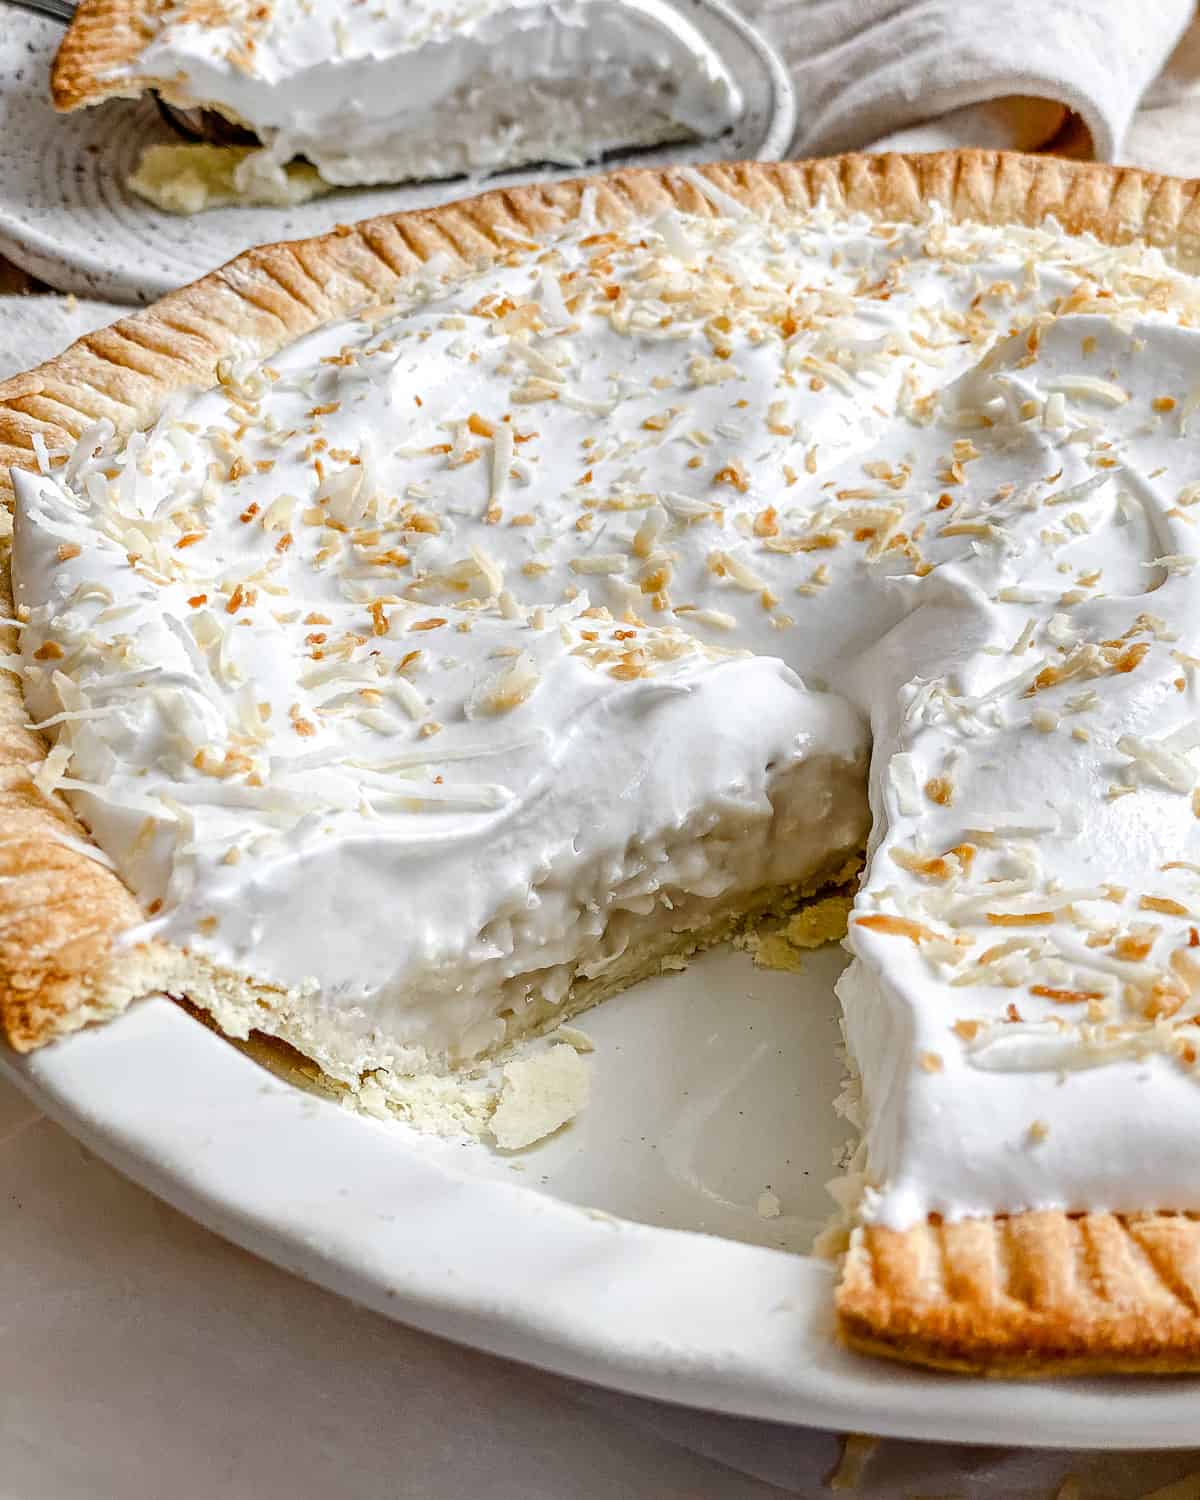 completed Vegan Coconut Cream Pie against a white background